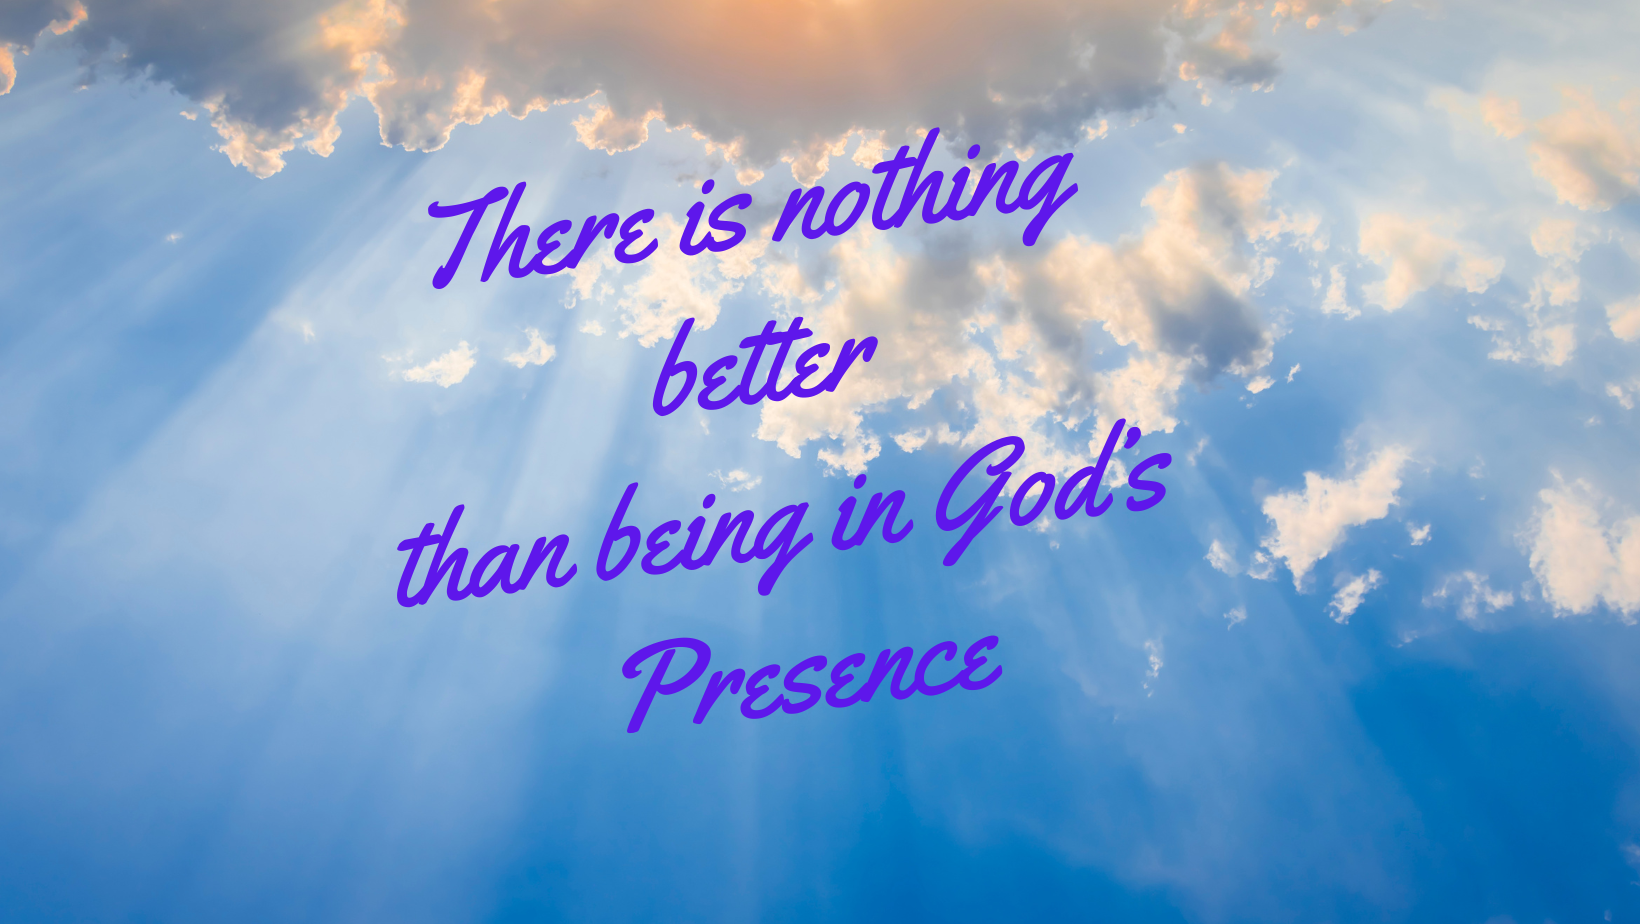 There is nothing better than being in God's presence - Psalm 84